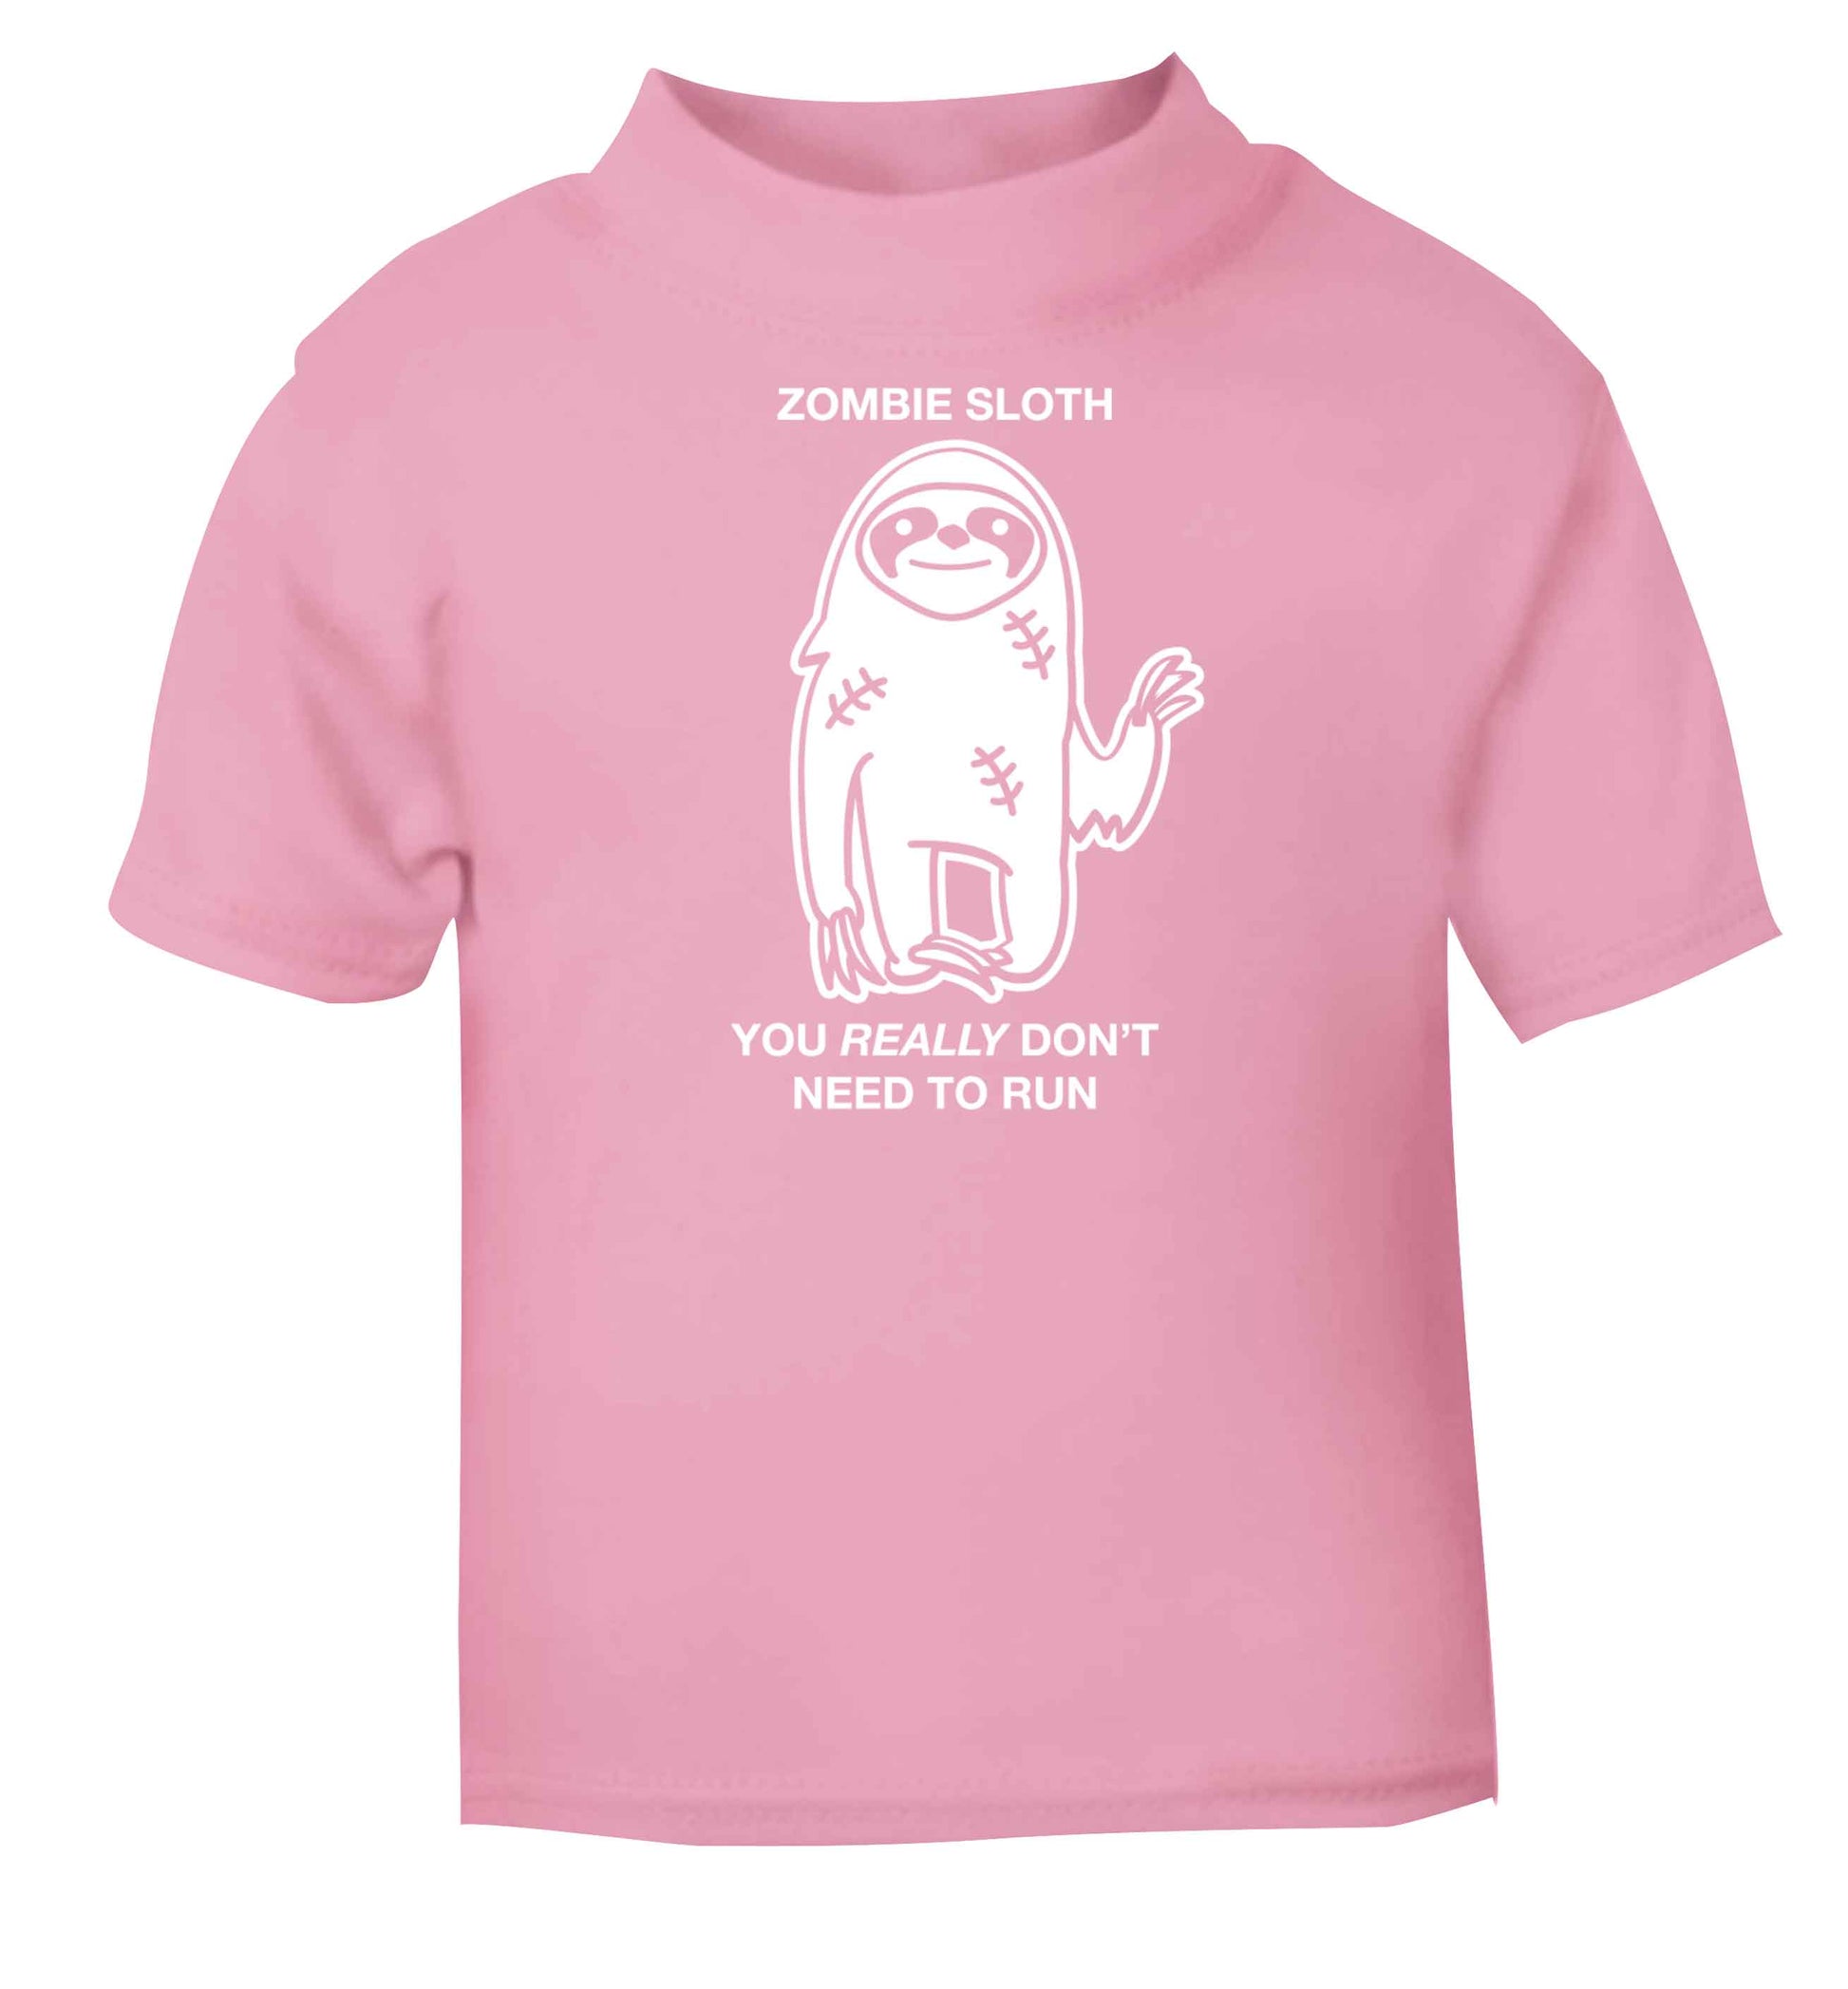 Zombie sloth you really don't need to run light pink baby toddler Tshirt 2 Years